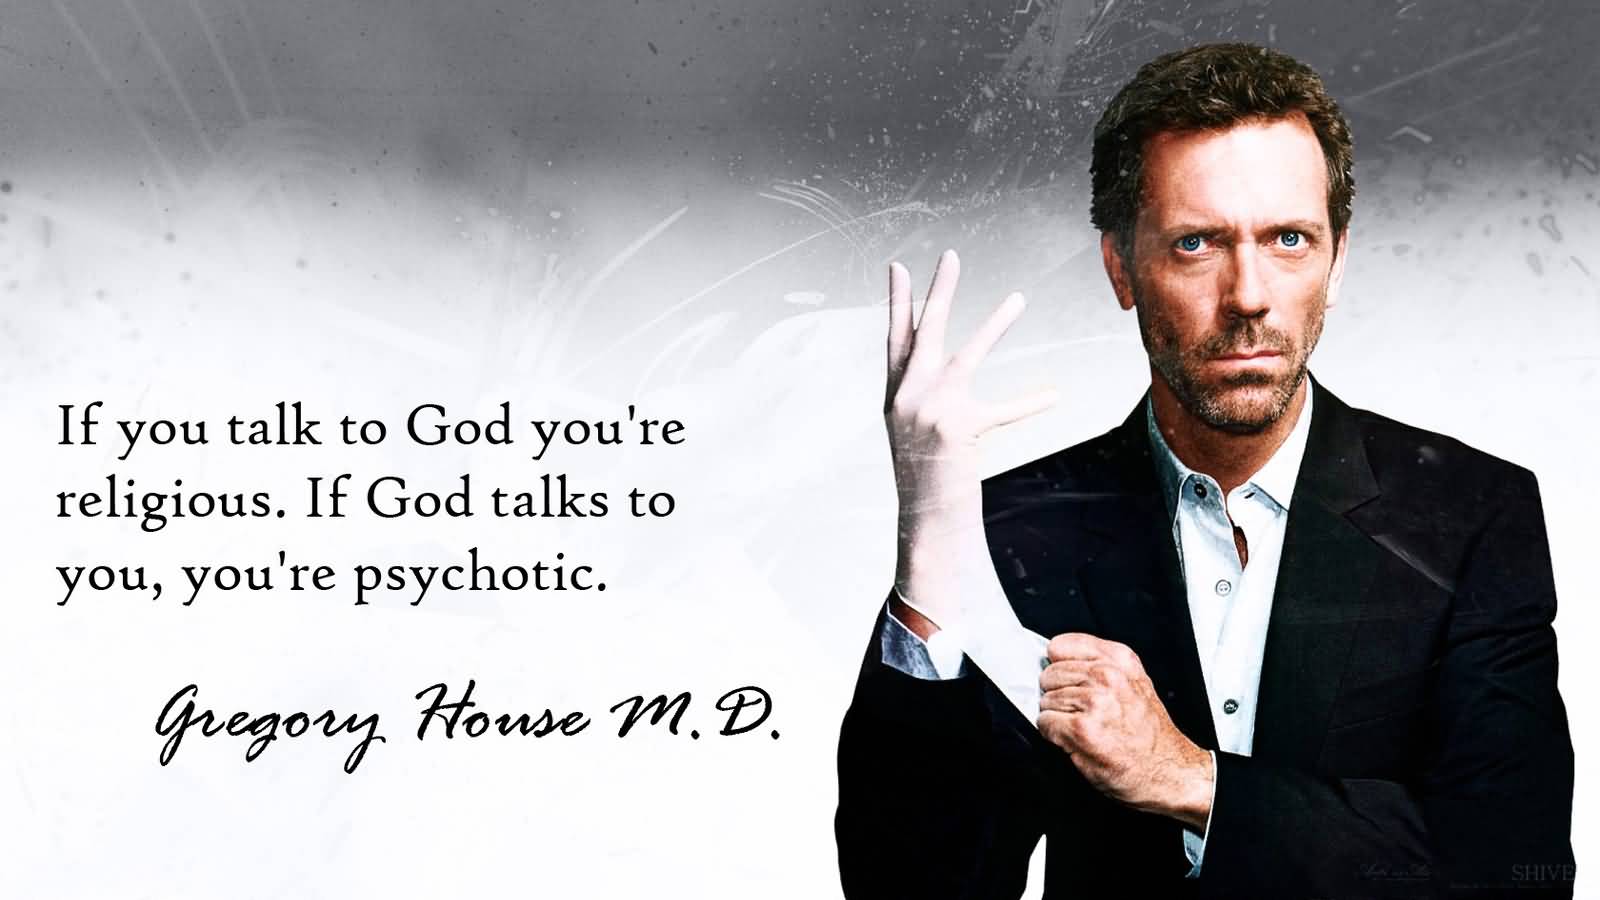 You talk to God, you're religious. God talks to you, you're psychotic. Gregory House M. D.